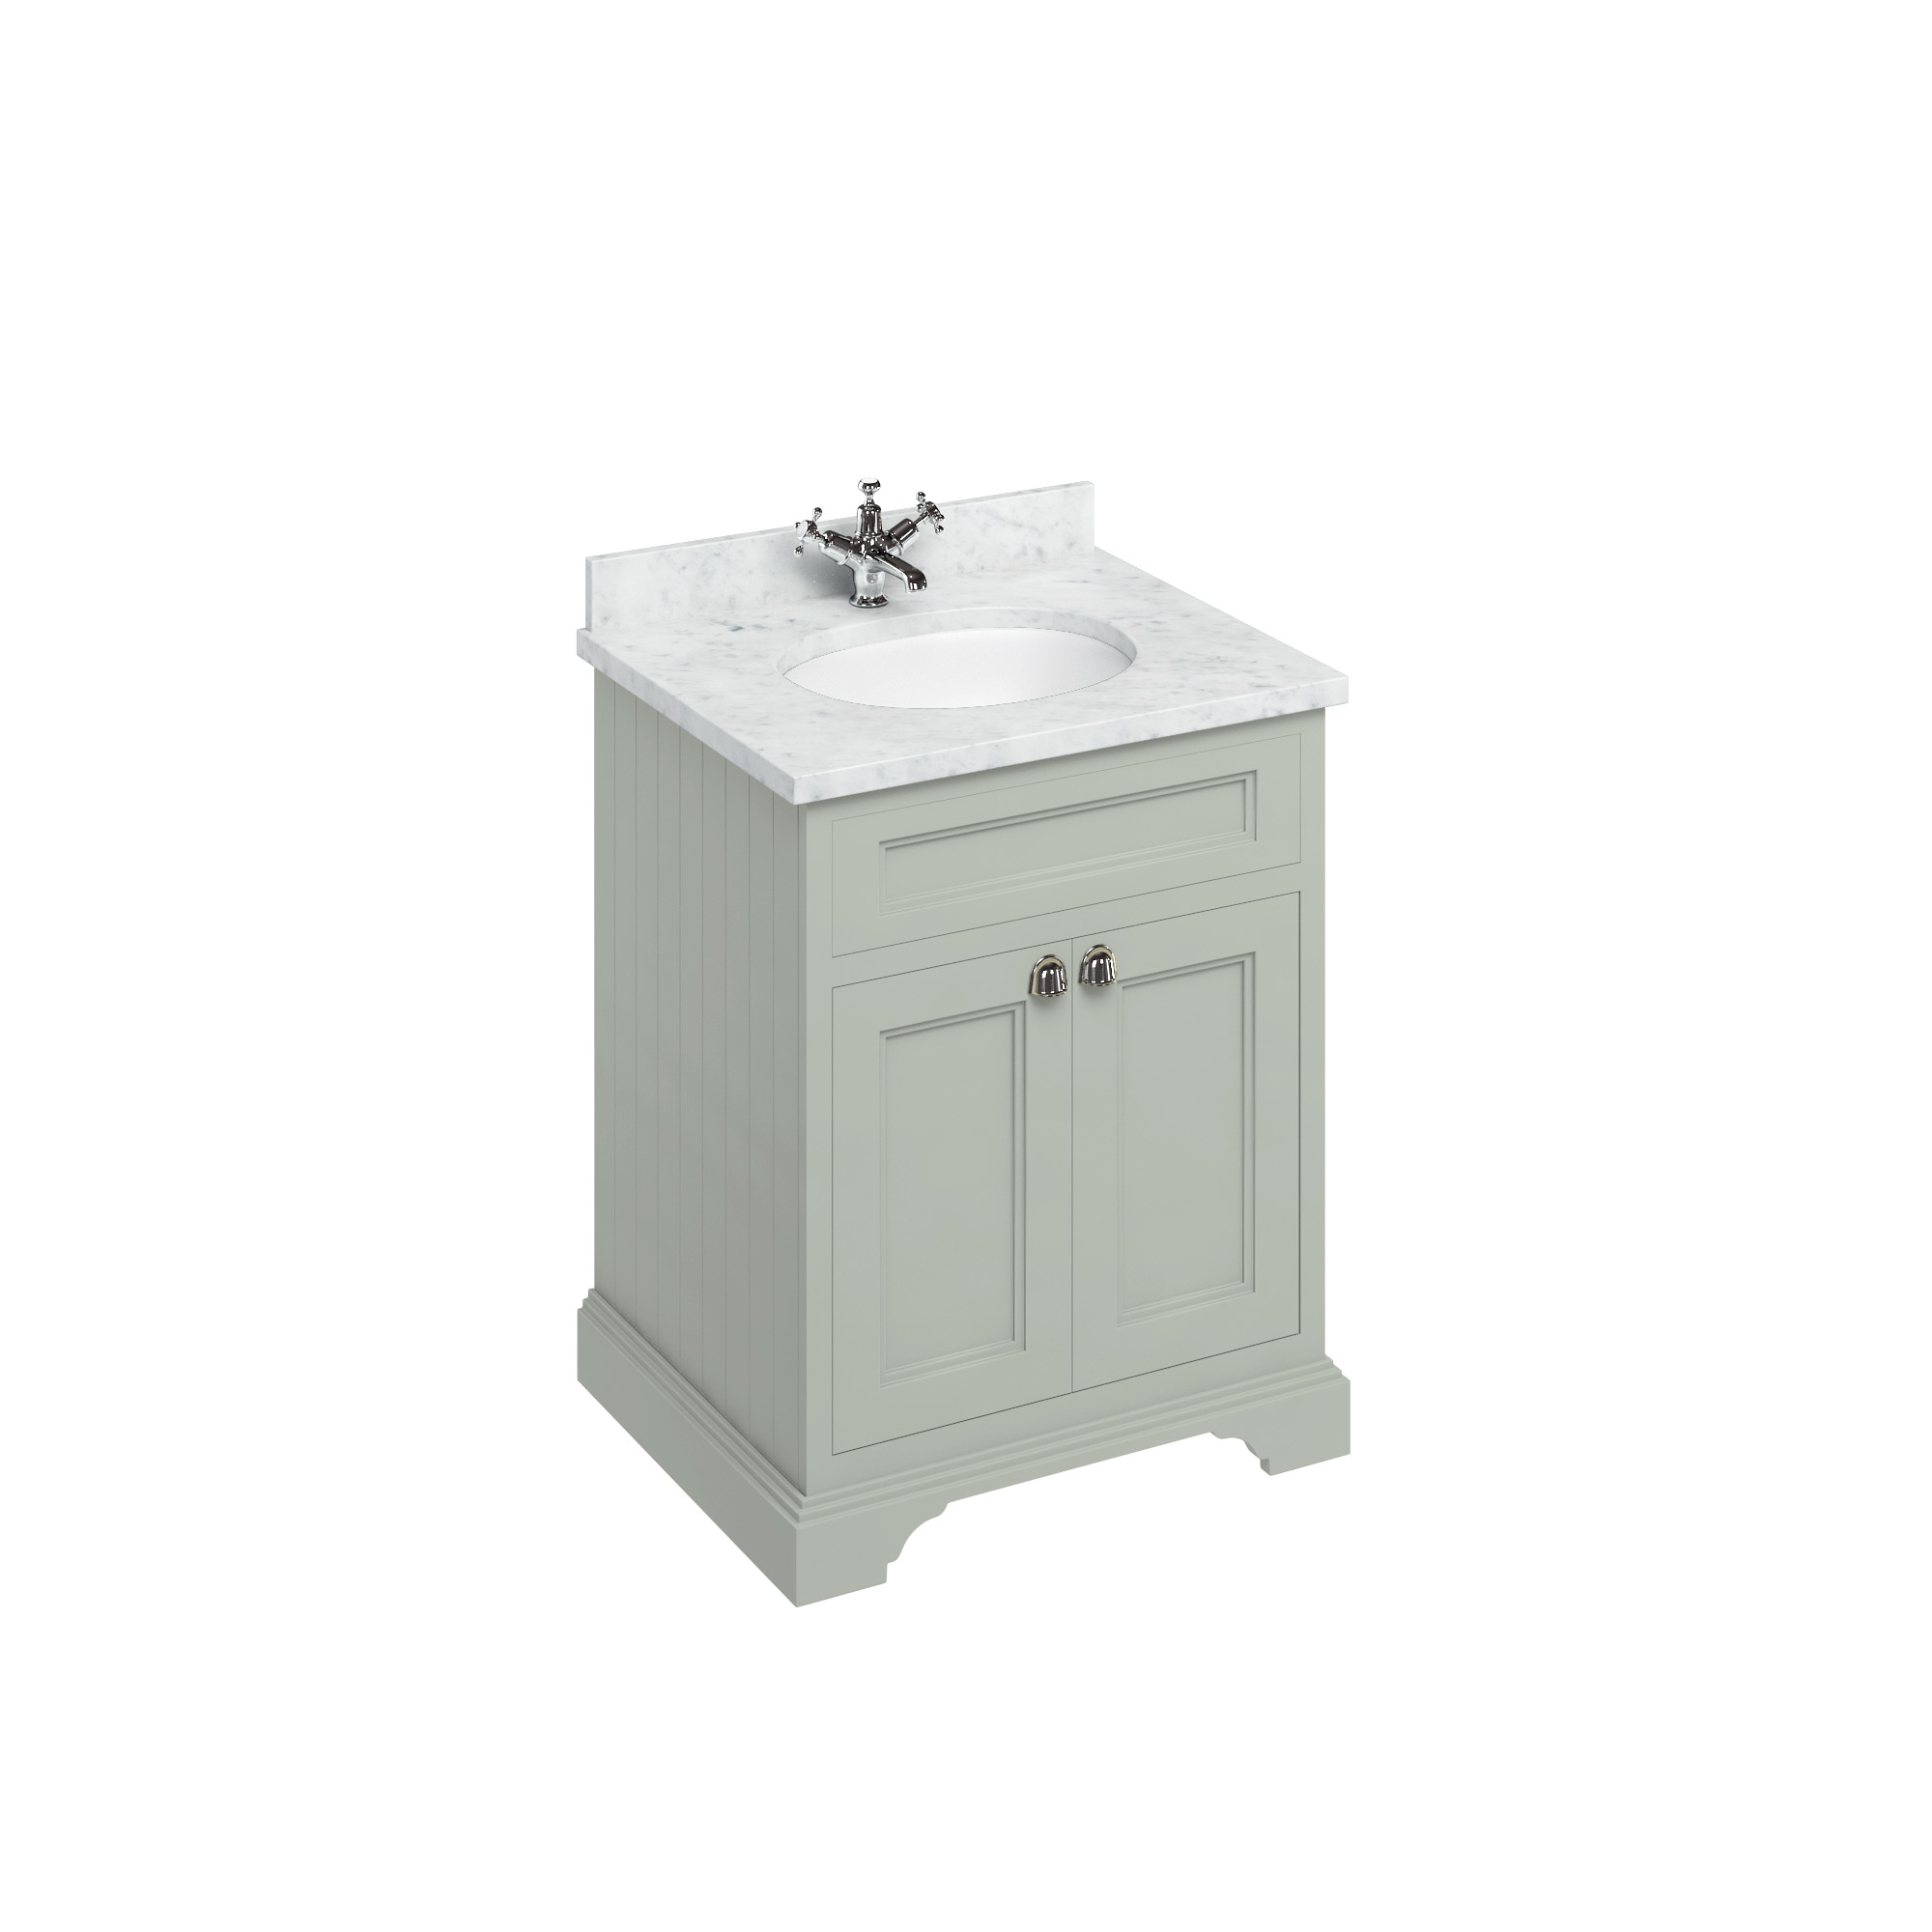 Freestanding 65 Vanity Unit with doors - Dark Olive and Minerva Carrara white worktop with integrated white basin